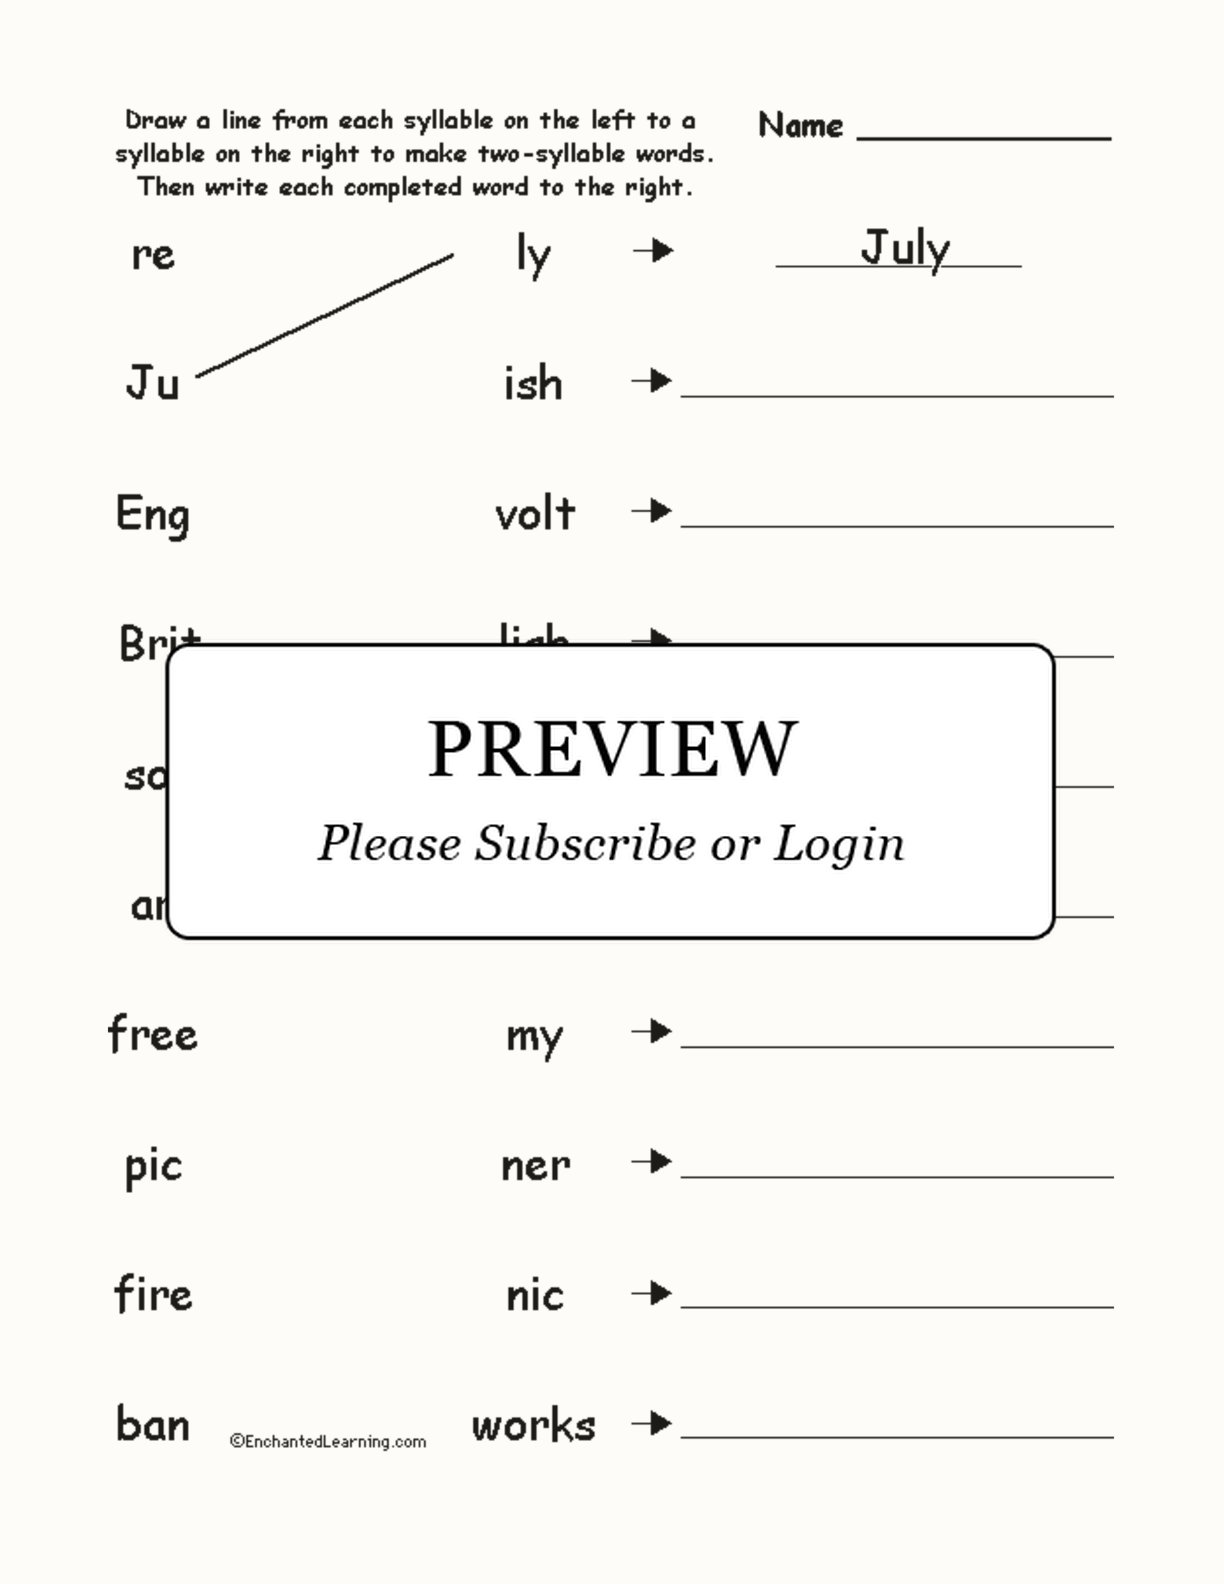 Match the Syllables: July 4th-related Words interactive worksheet page 1